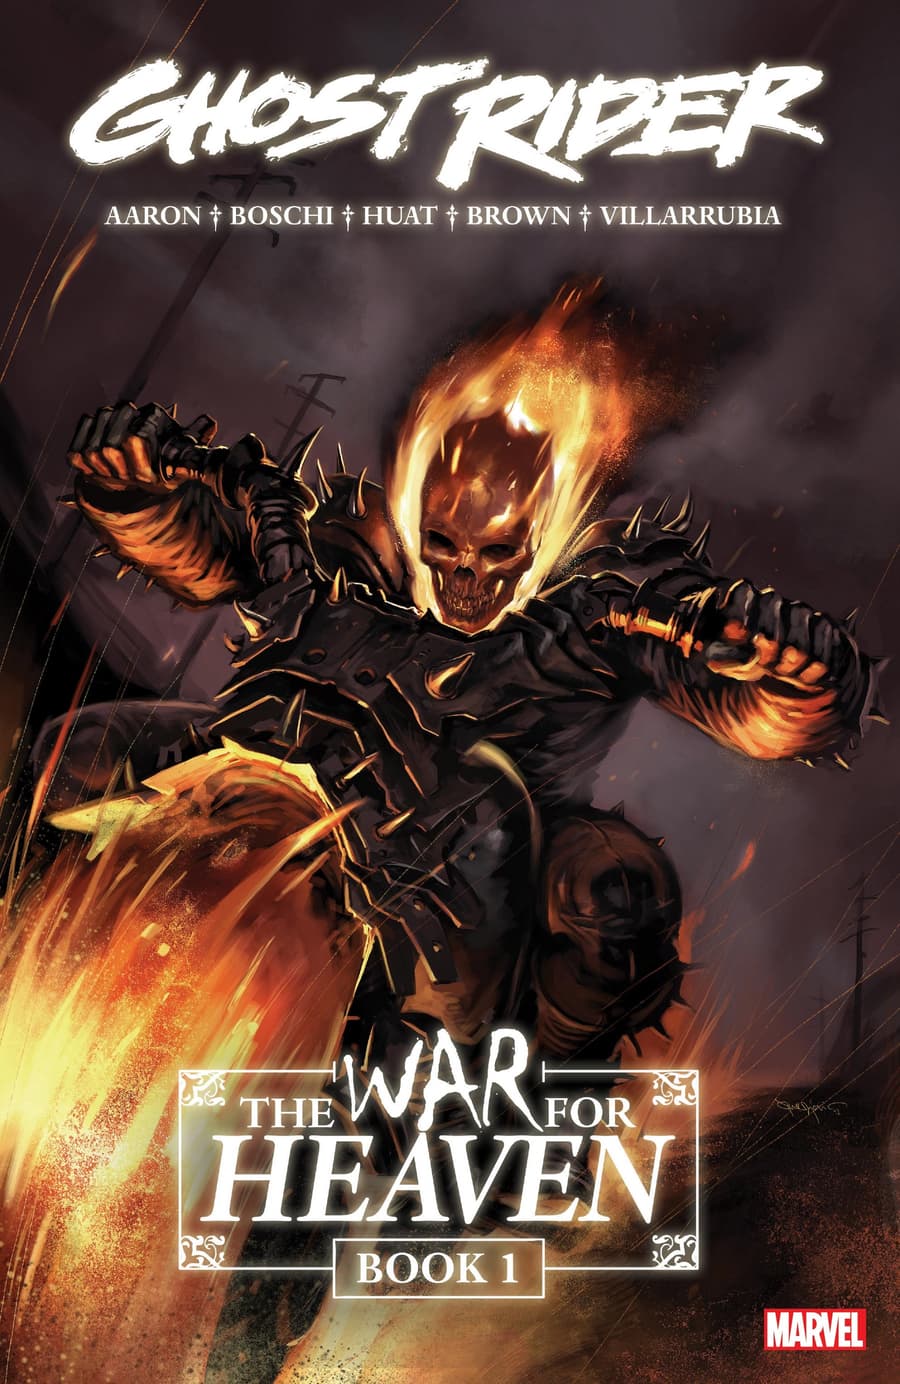 Cover to GHOST RIDER: THE WAR FOR HEAVEN BOOK 1